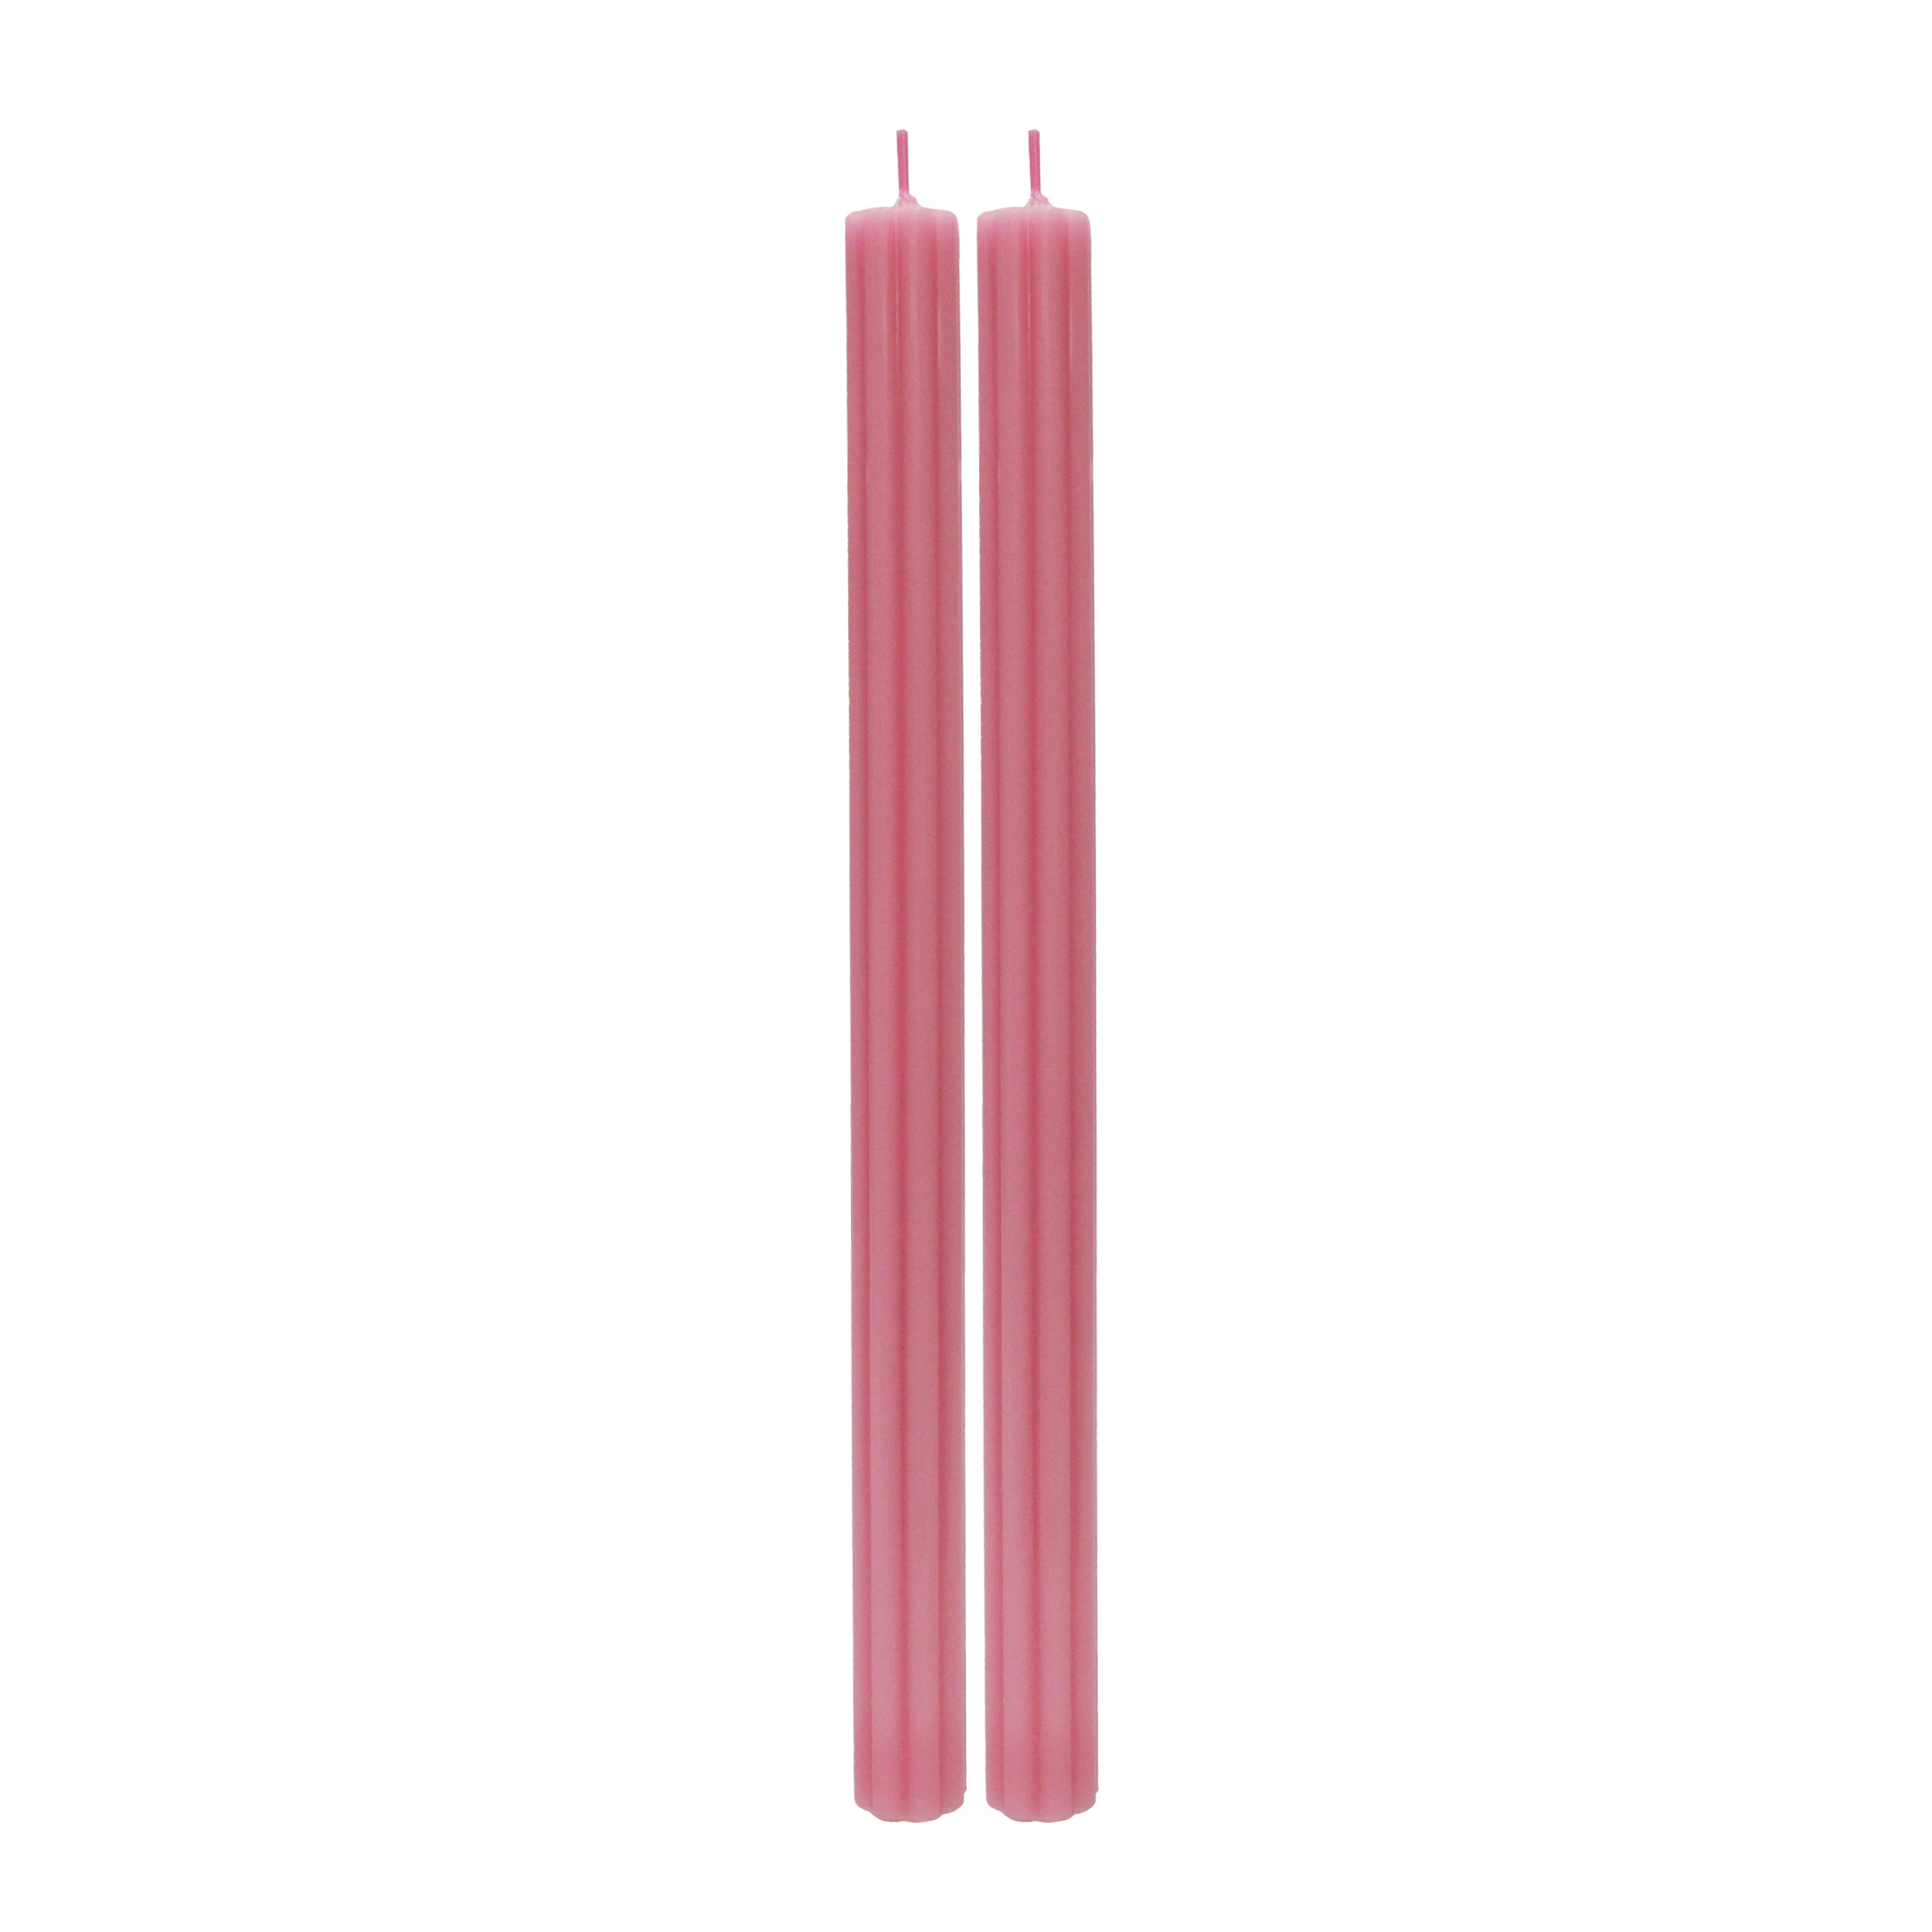 Better Homes & Gardens Unscented Taper Candles, Pink, 2-Pack, 11 inches Height - image 1 of 5